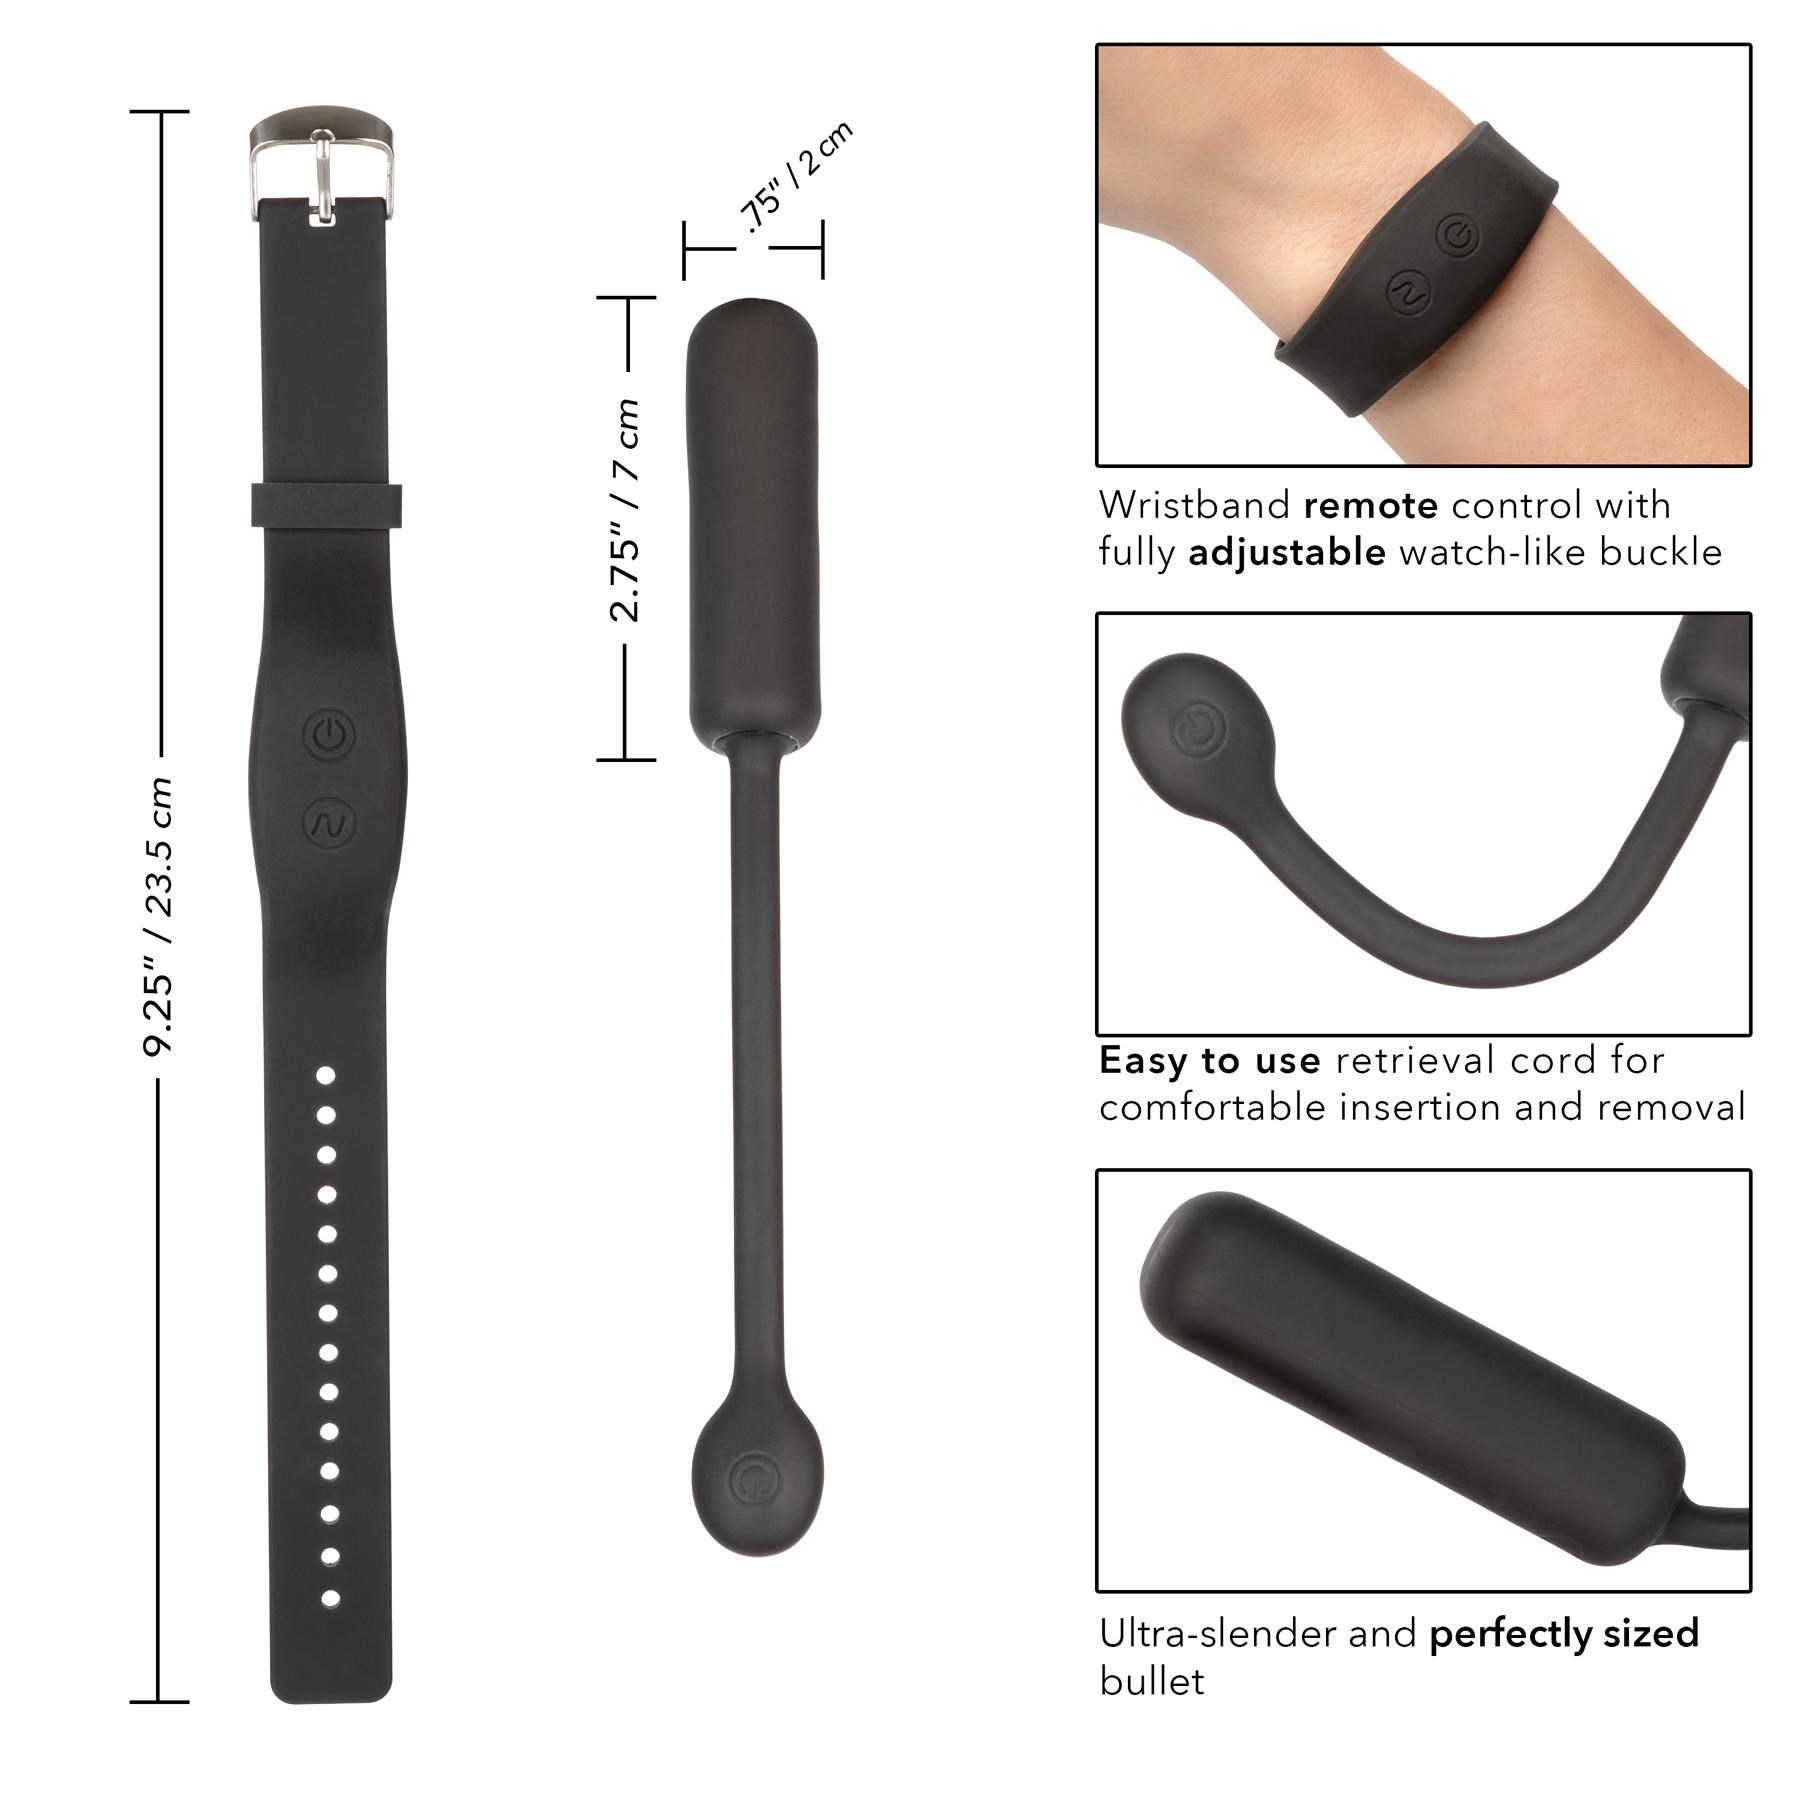 Wristband Remote Petite Bullet - Dimensions and Instructions